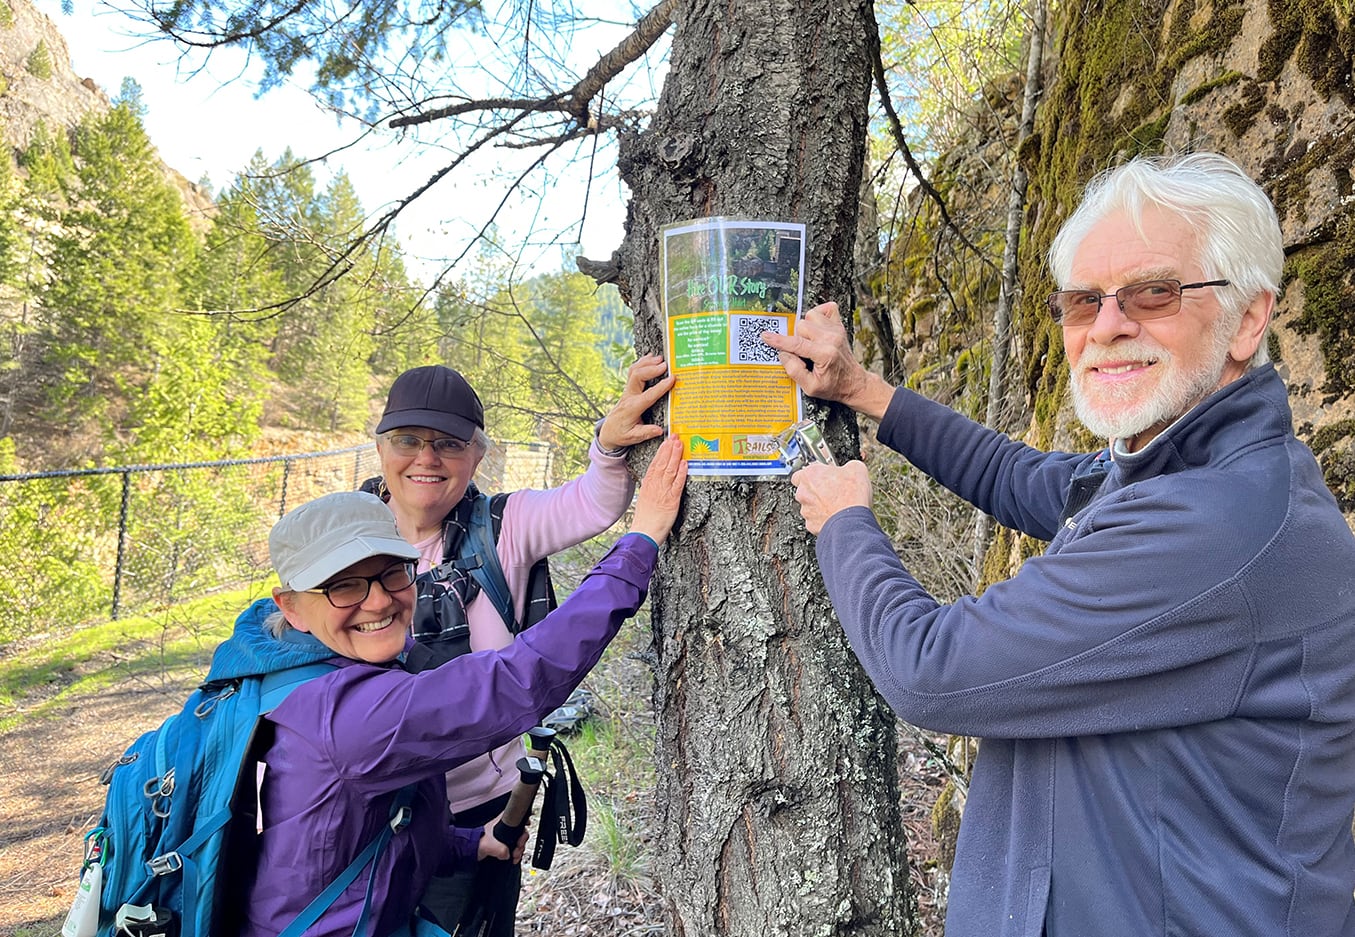 Boundary hiking challenge provides motivation to explore local trails